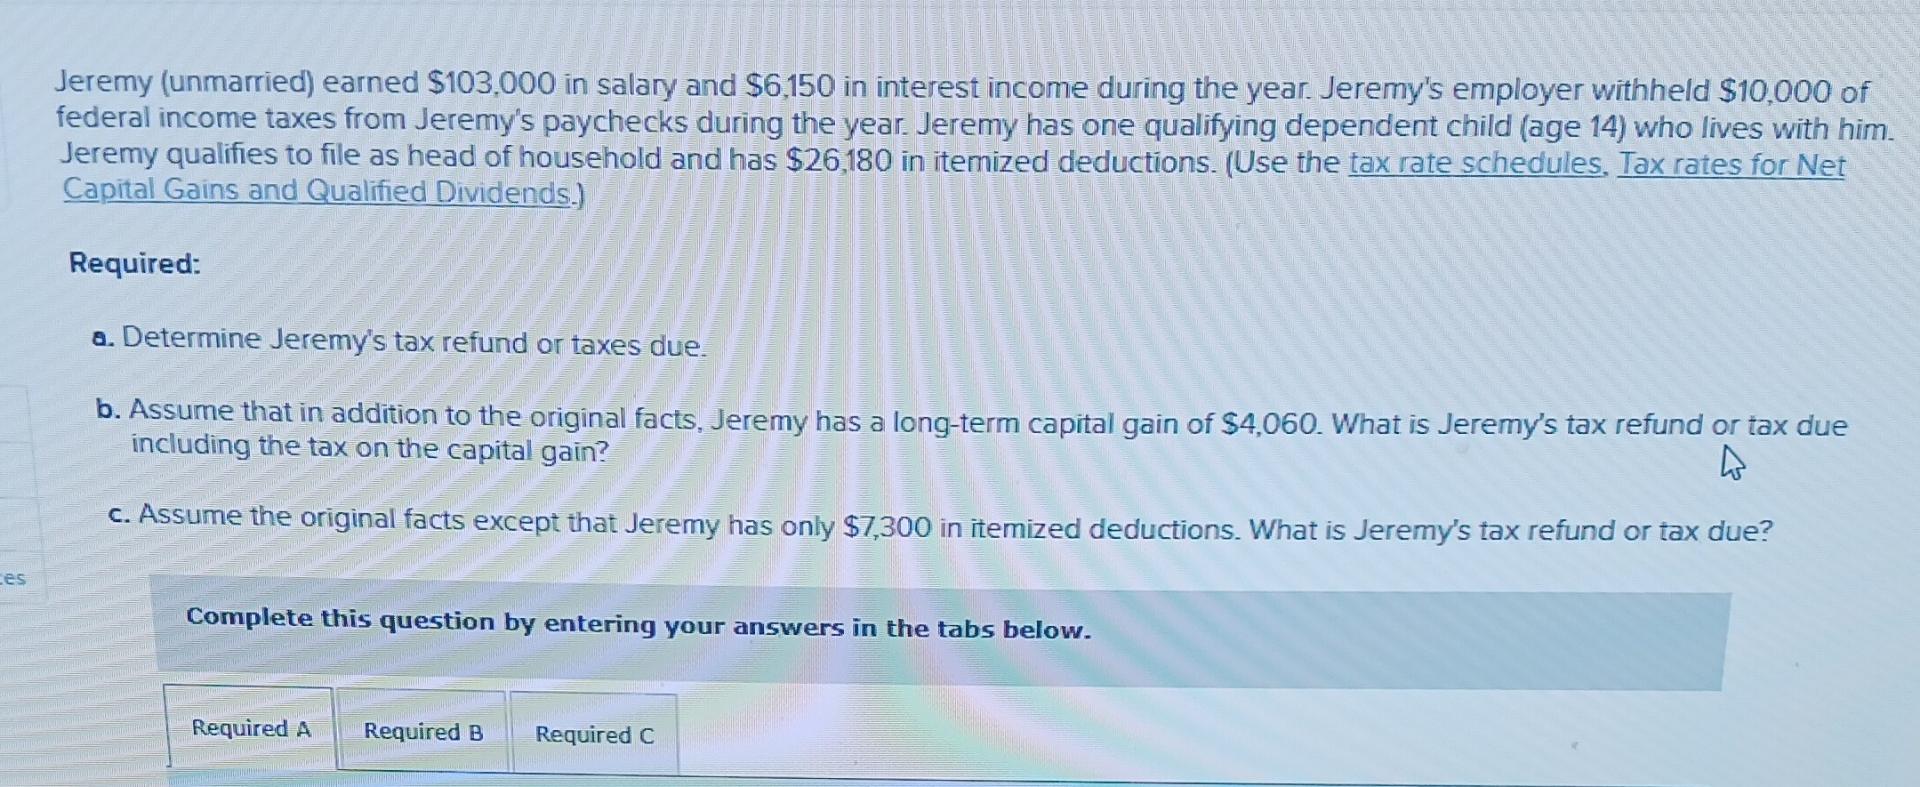 ces Jeremy (unmarried) earned $103,000 in salary and $6,150 in interest income during the year. Jeremy's